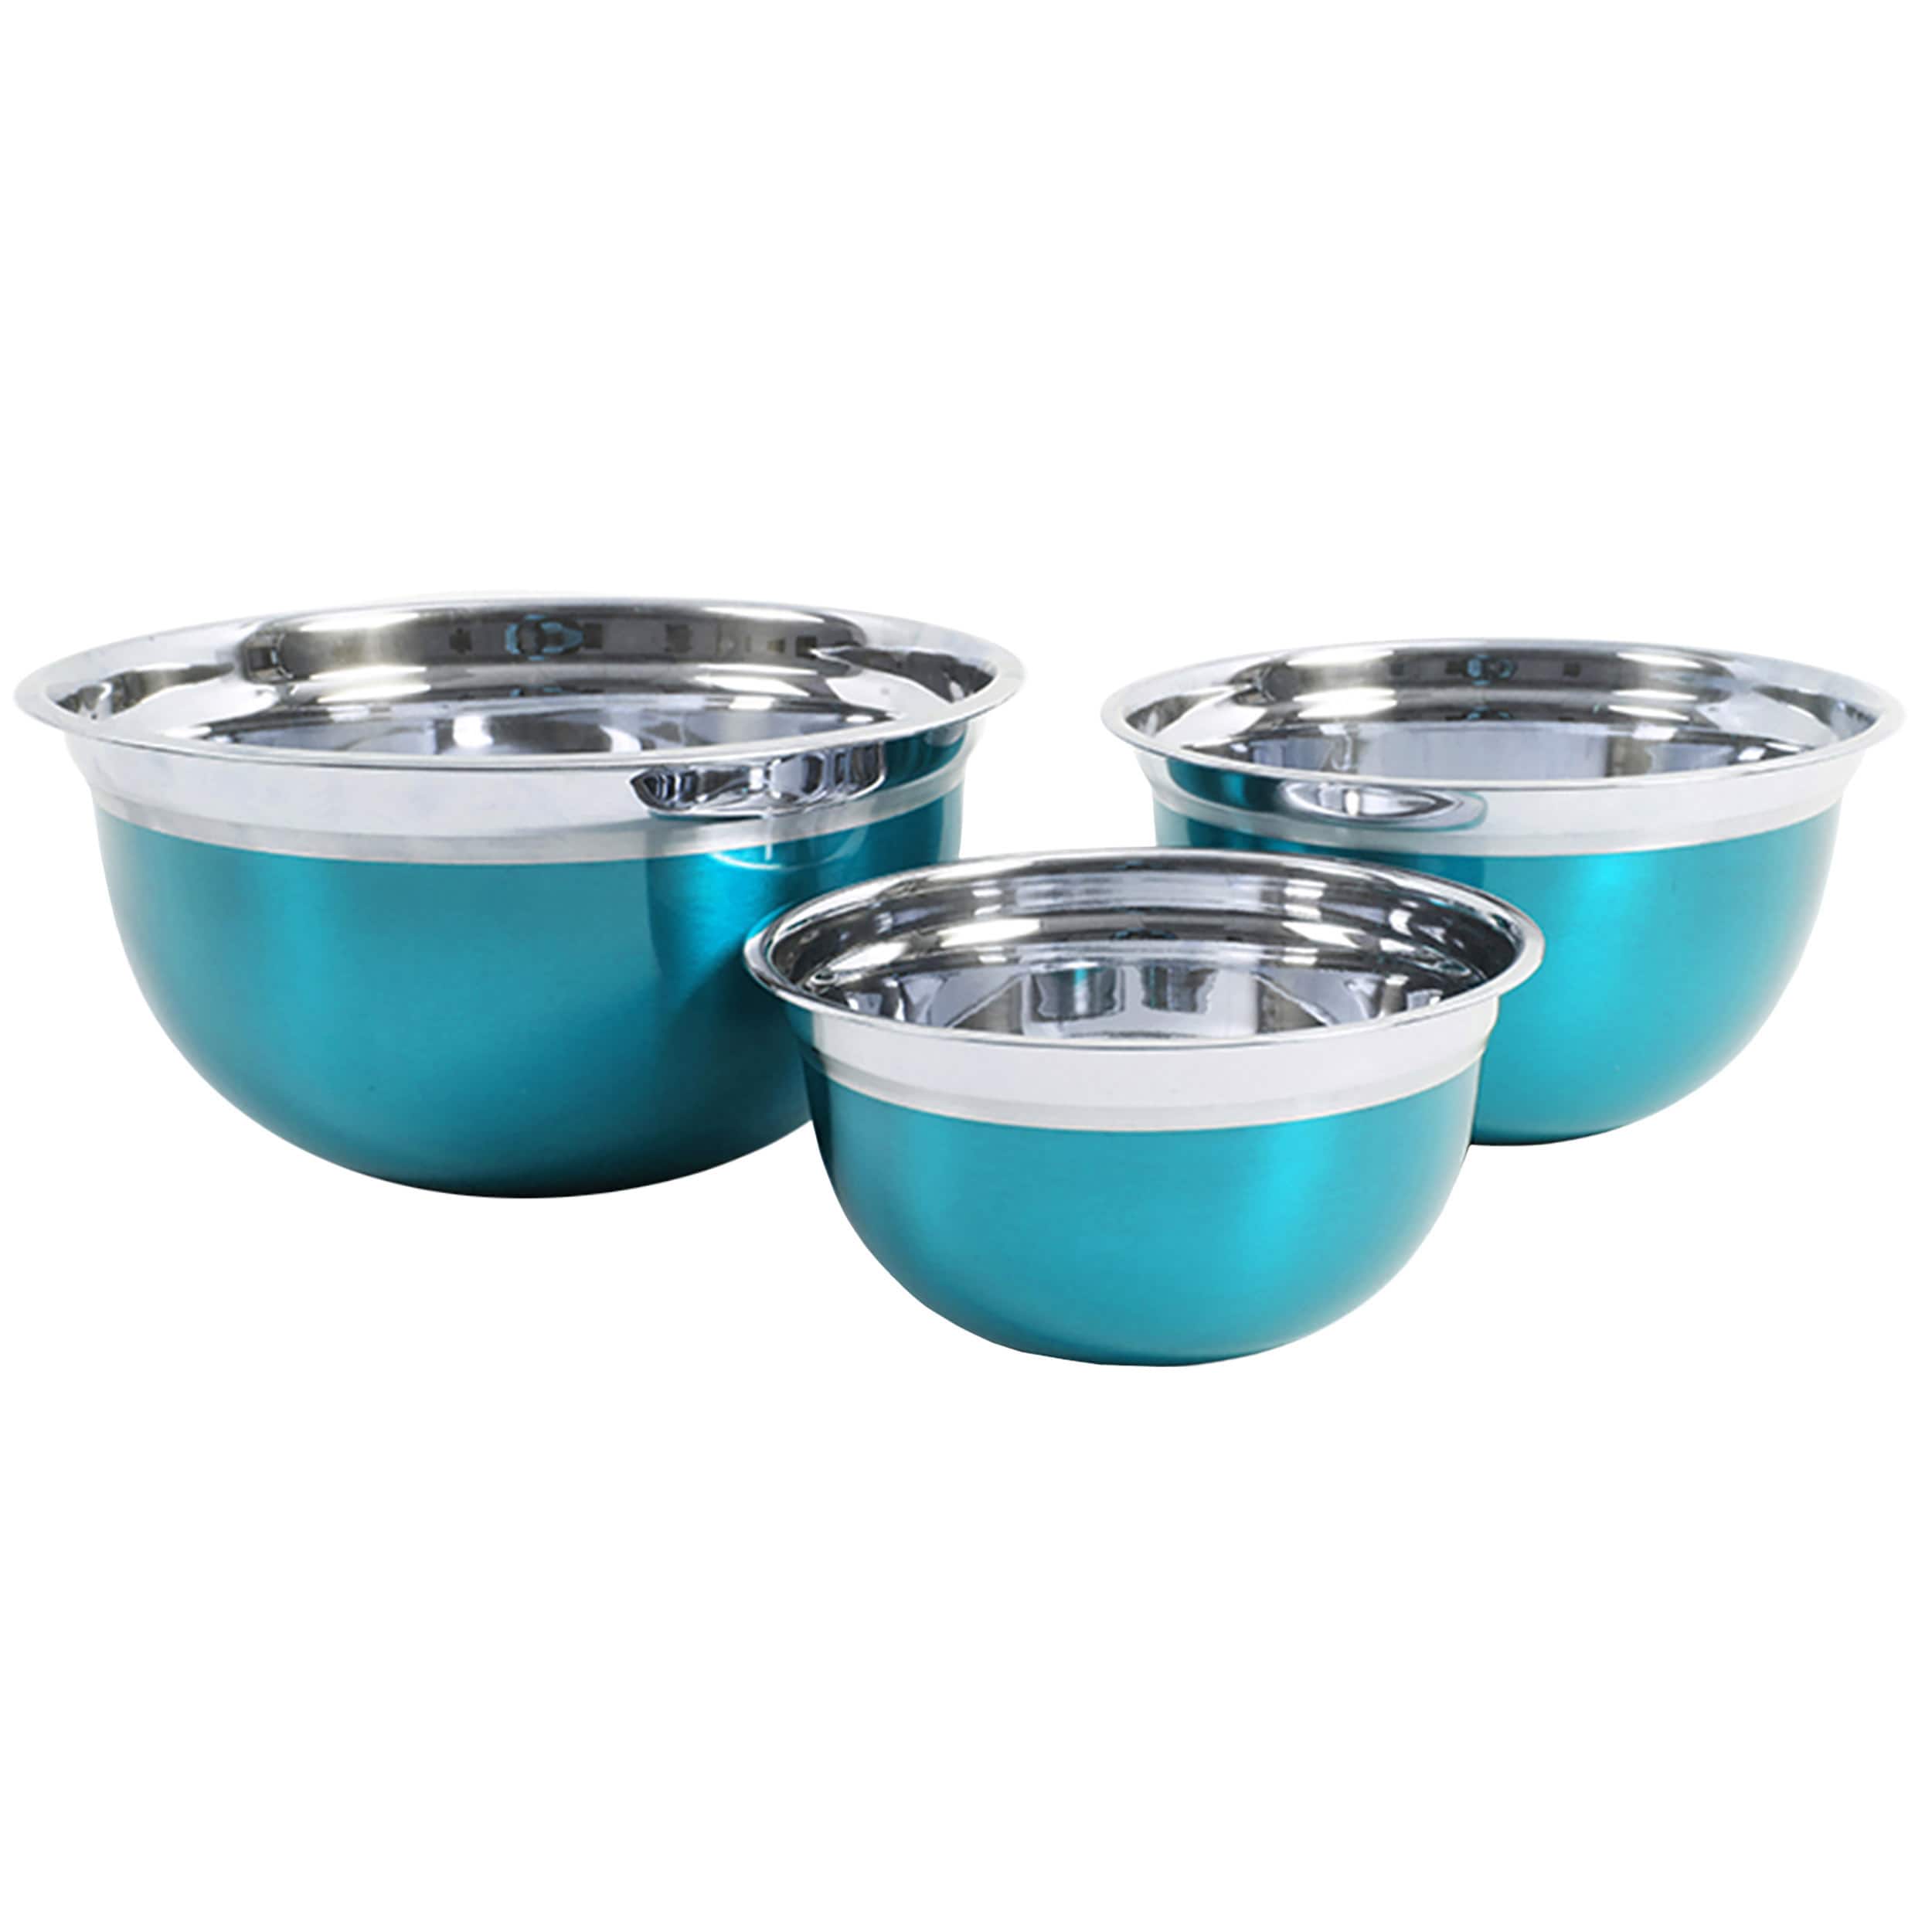 Oster Rosamond Turquoise Stainless Steel Mixing Bowl Set | Michaels